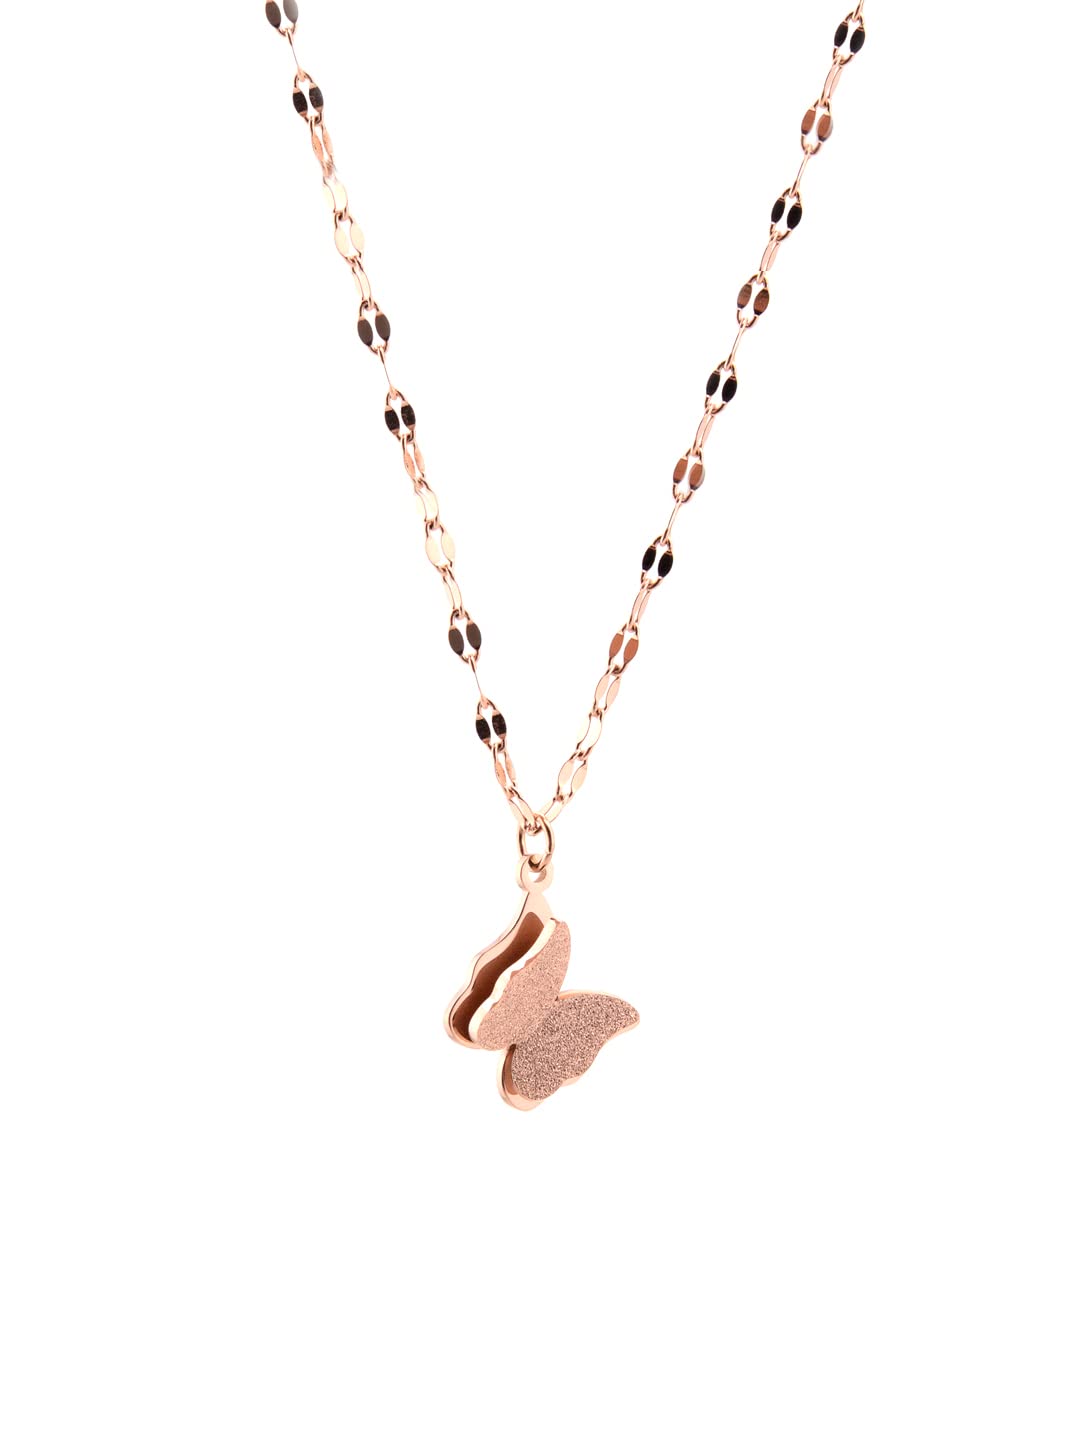 Yellow Chimes Butterfly Pendant for Women Statement Style Rose Gold Plated Butterfly Charm Chain Pendant Necklace for Women and Girls.